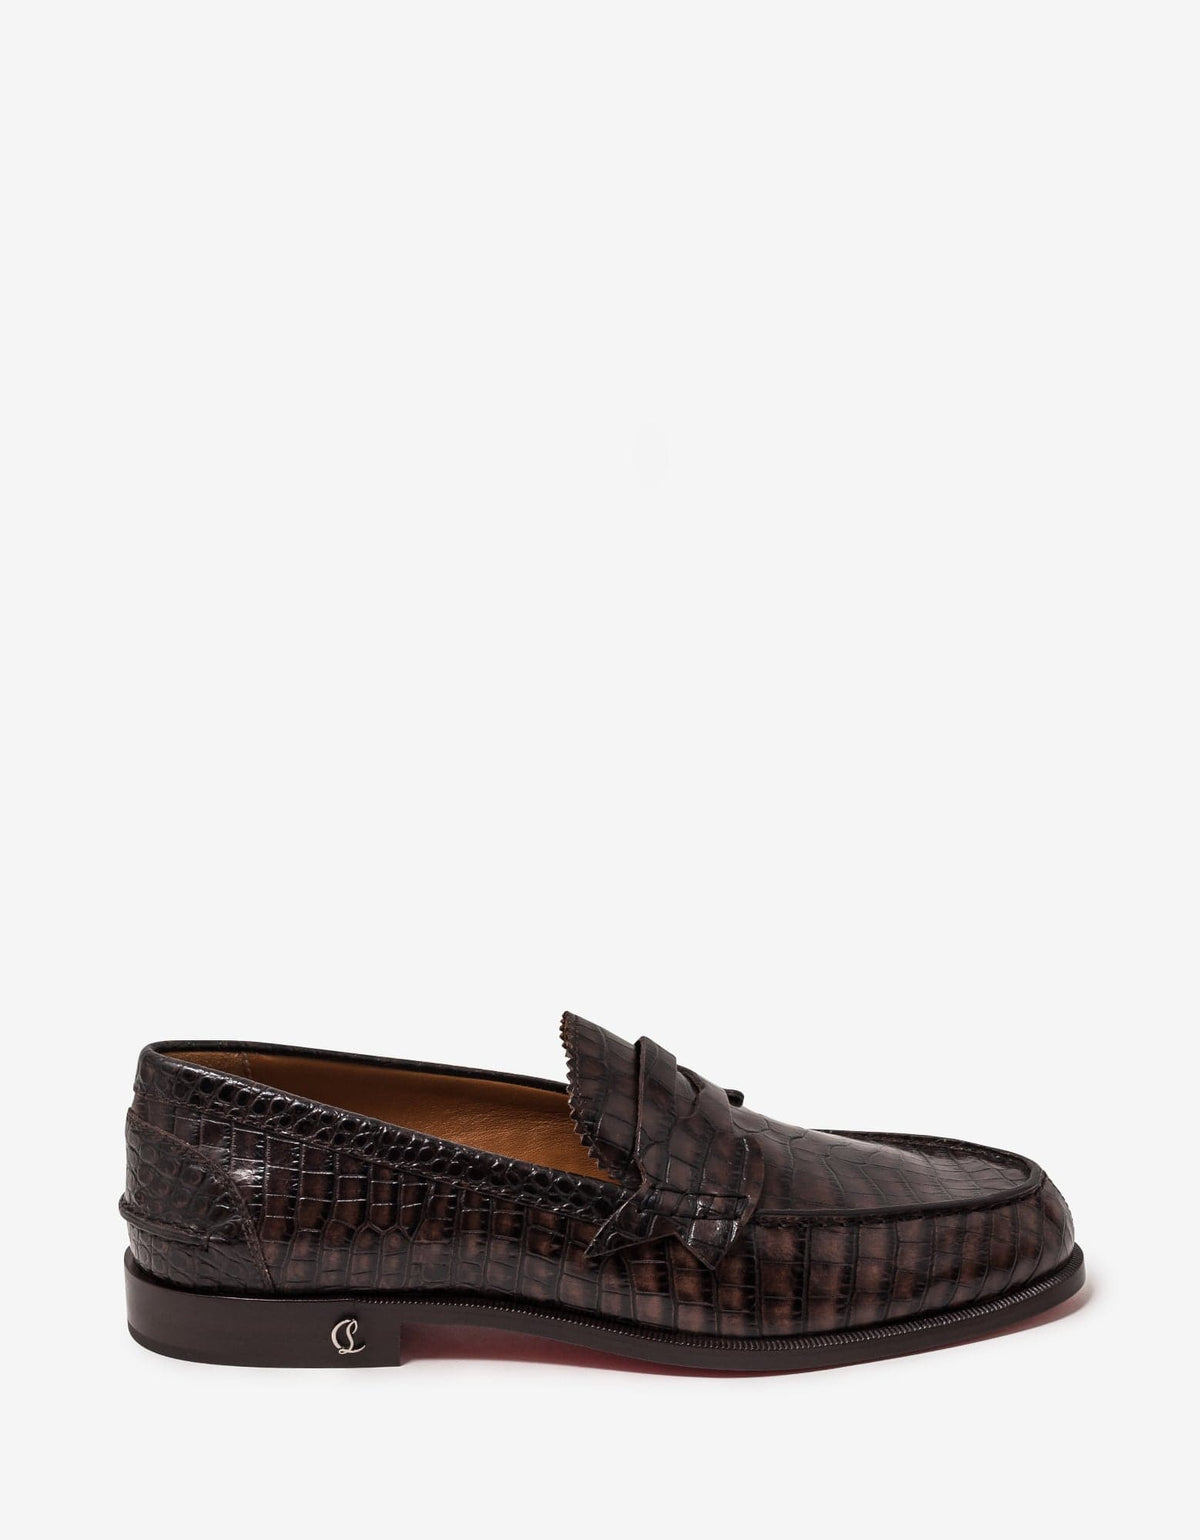 Christian Louboutin No Penny Mini-Croc Brown Loafers